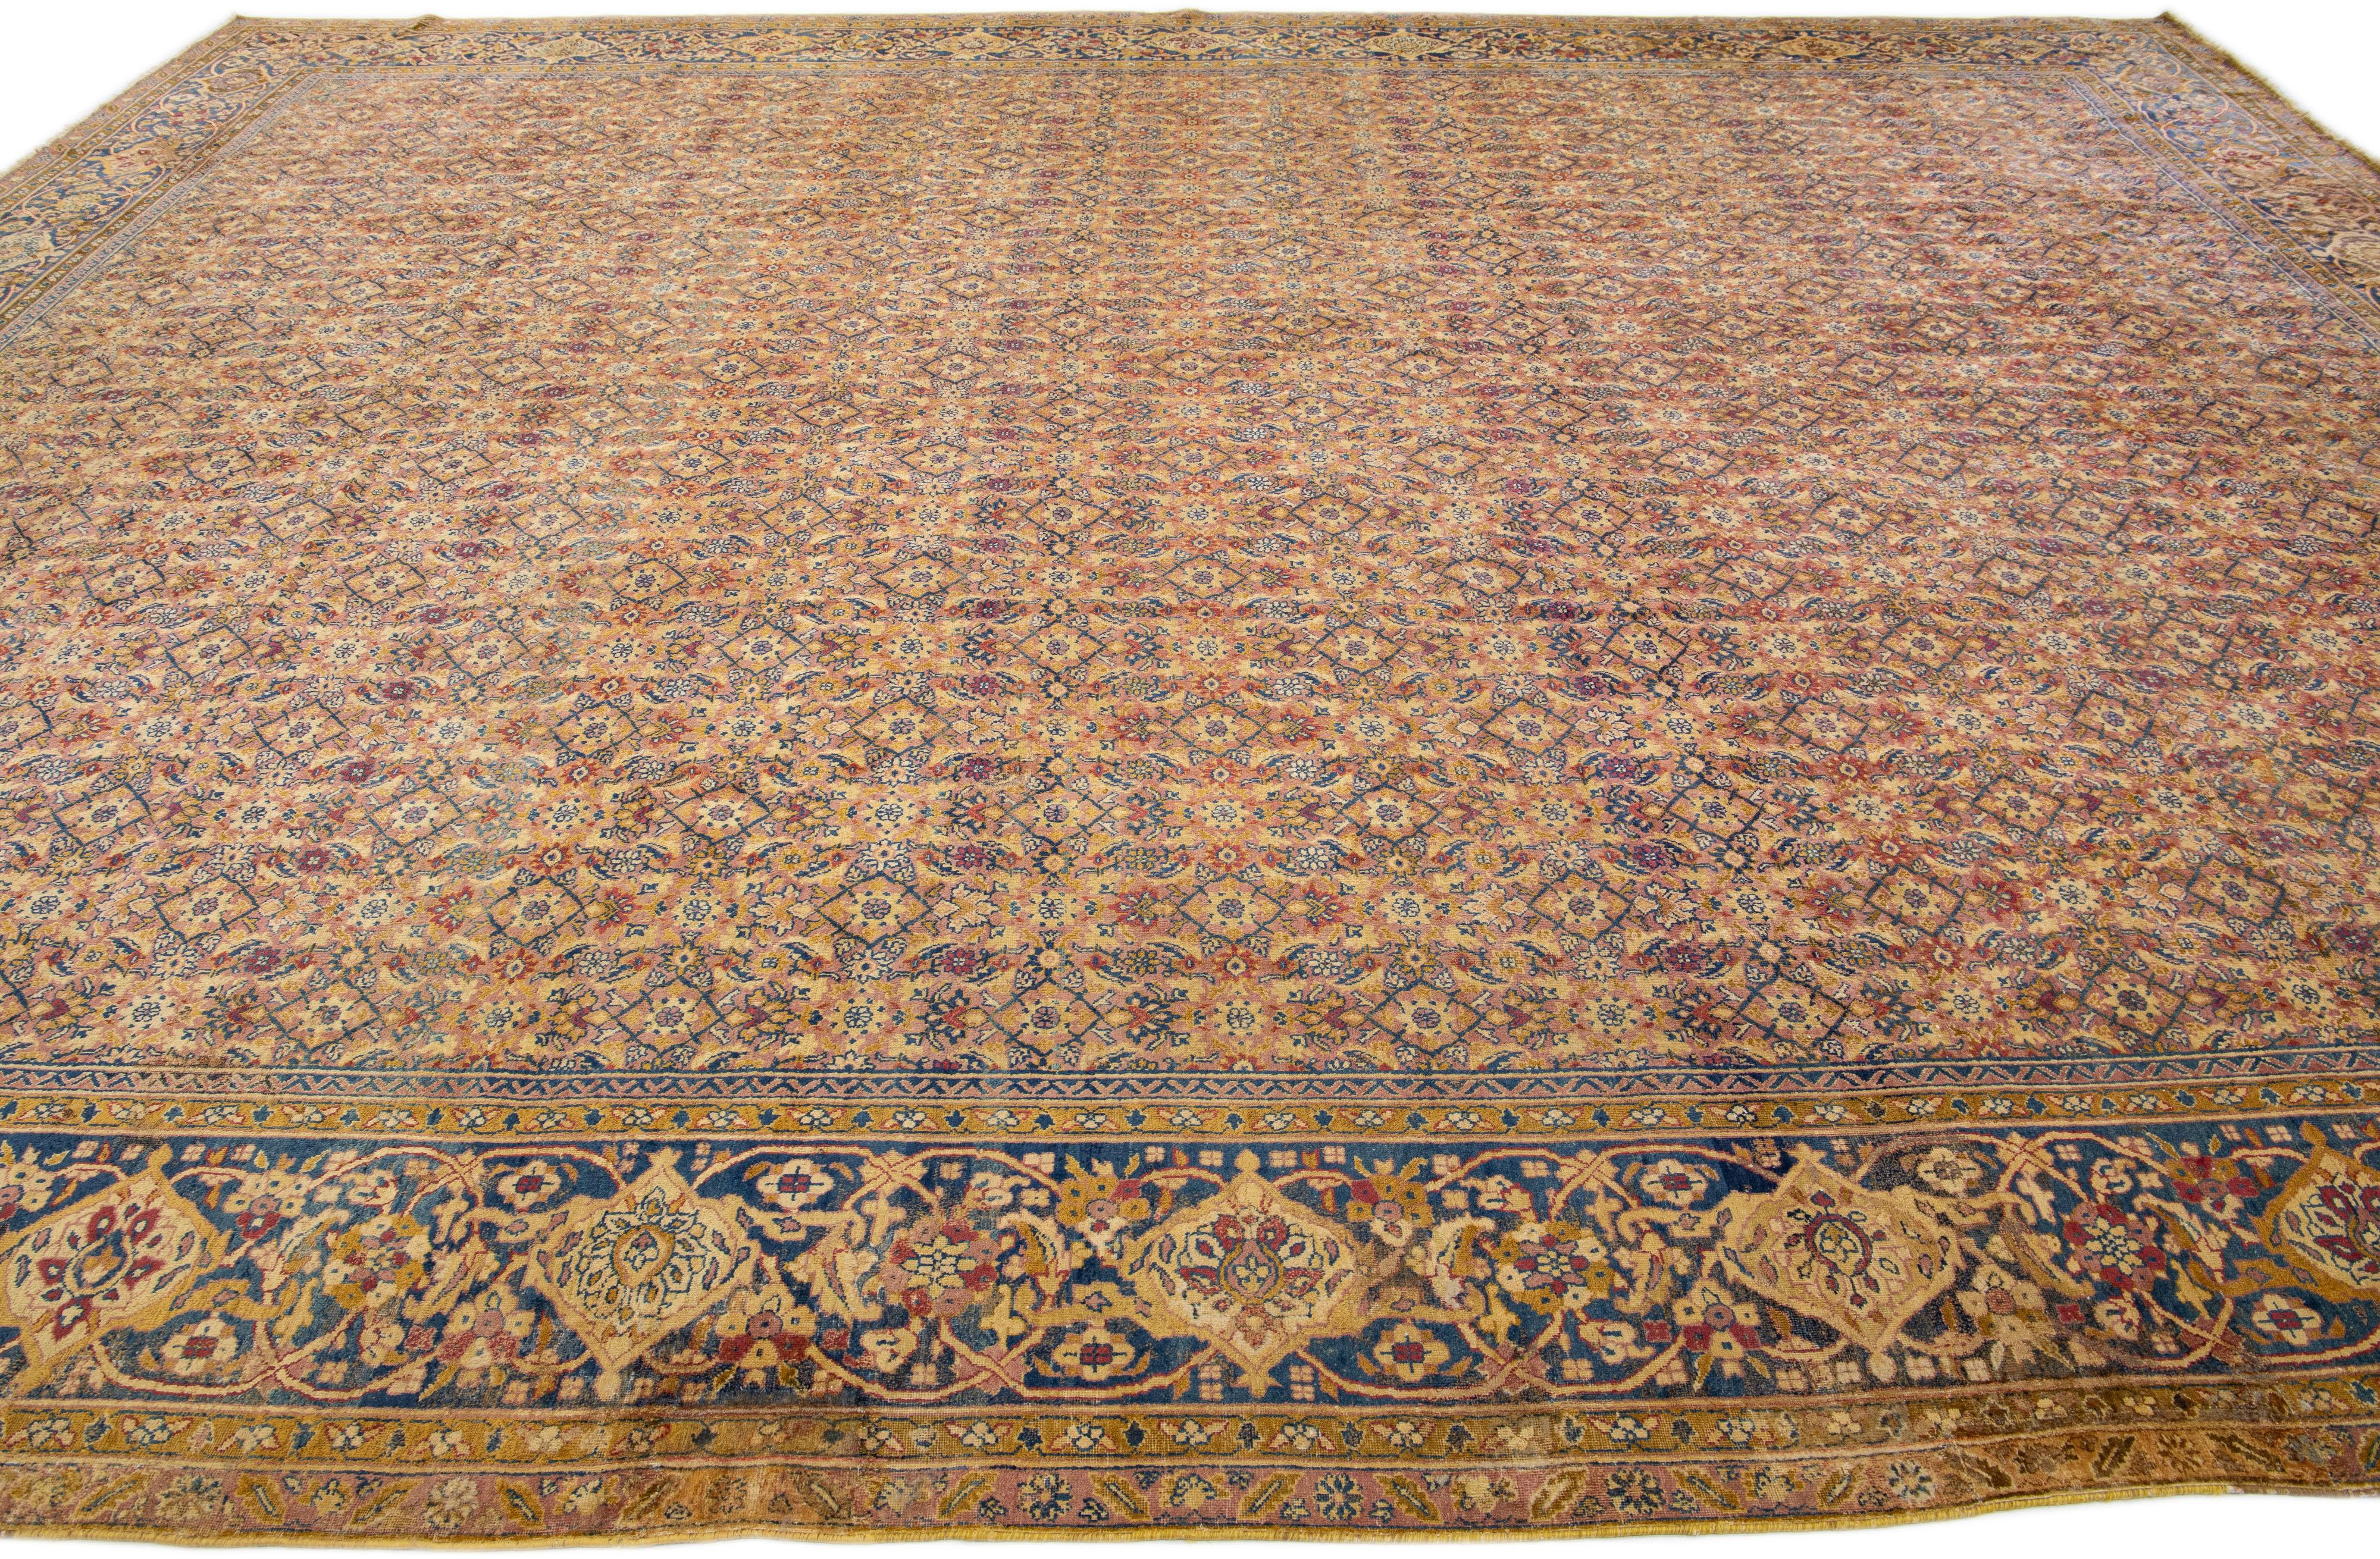 Antique Kerman Handmade Multicolor Allover Persian Wool Rug In Good Condition For Sale In Norwalk, CT